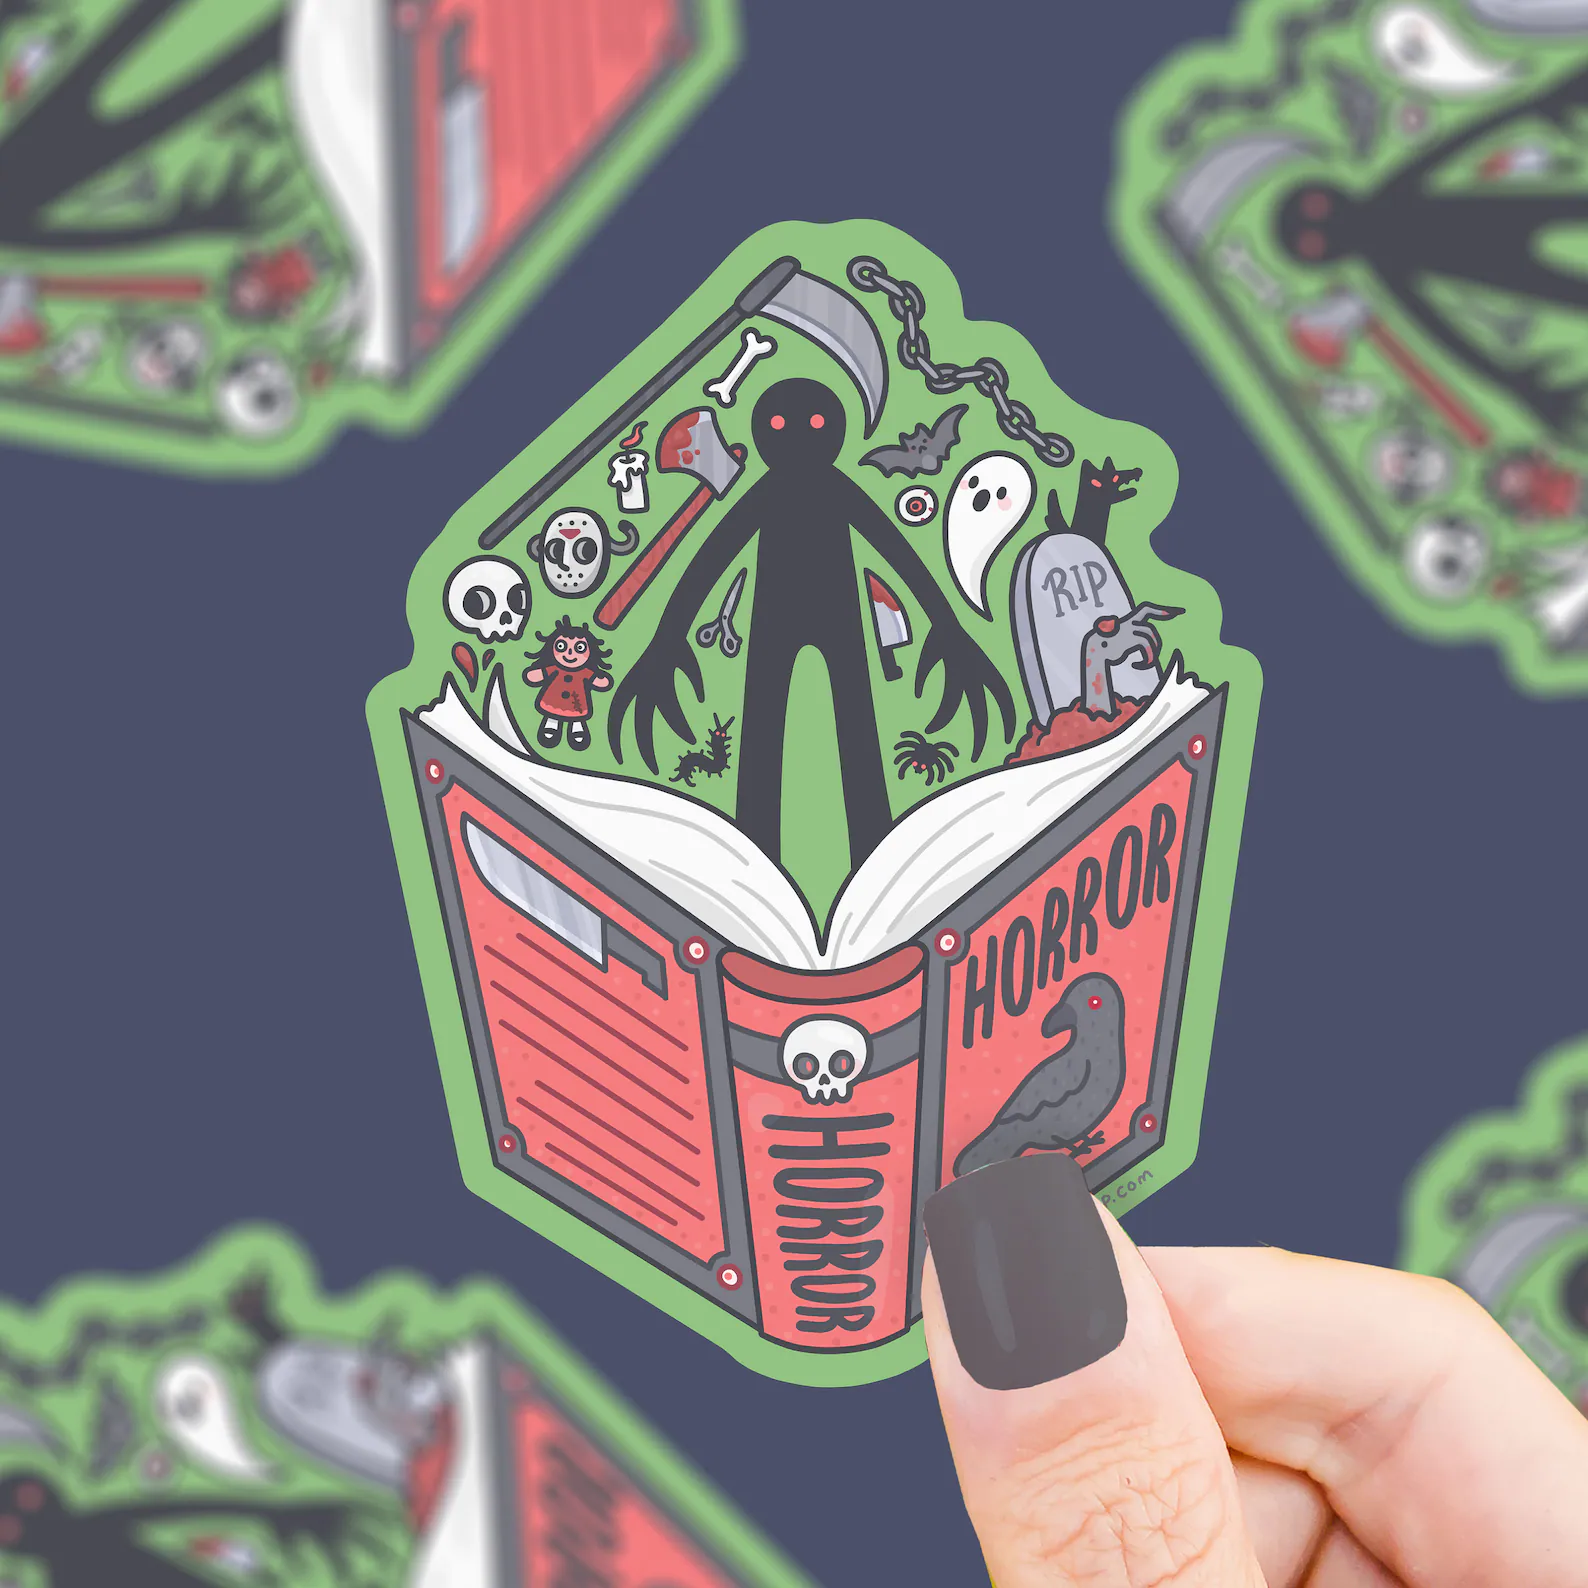 image of a sticker that is in the shape of a book called "horror." It has all kinds of horror iconography coming out from the top. 